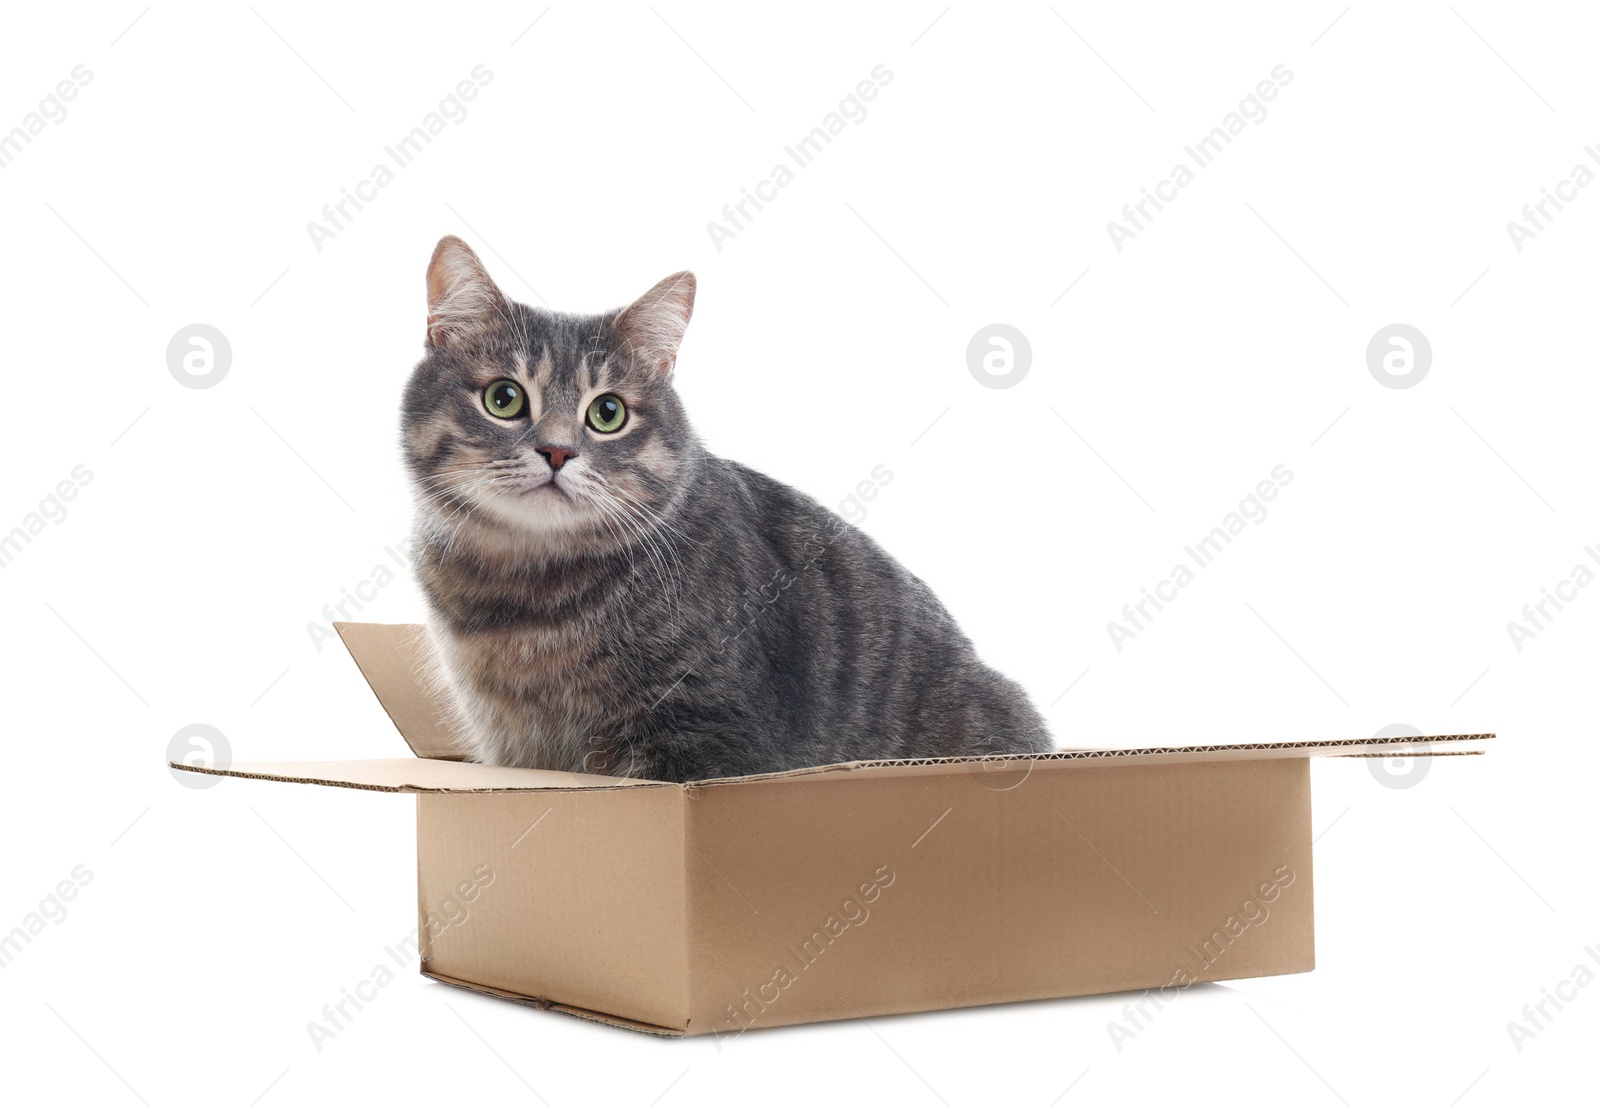 Photo of Cute grey tabby cat sitting in cardboard box on white background